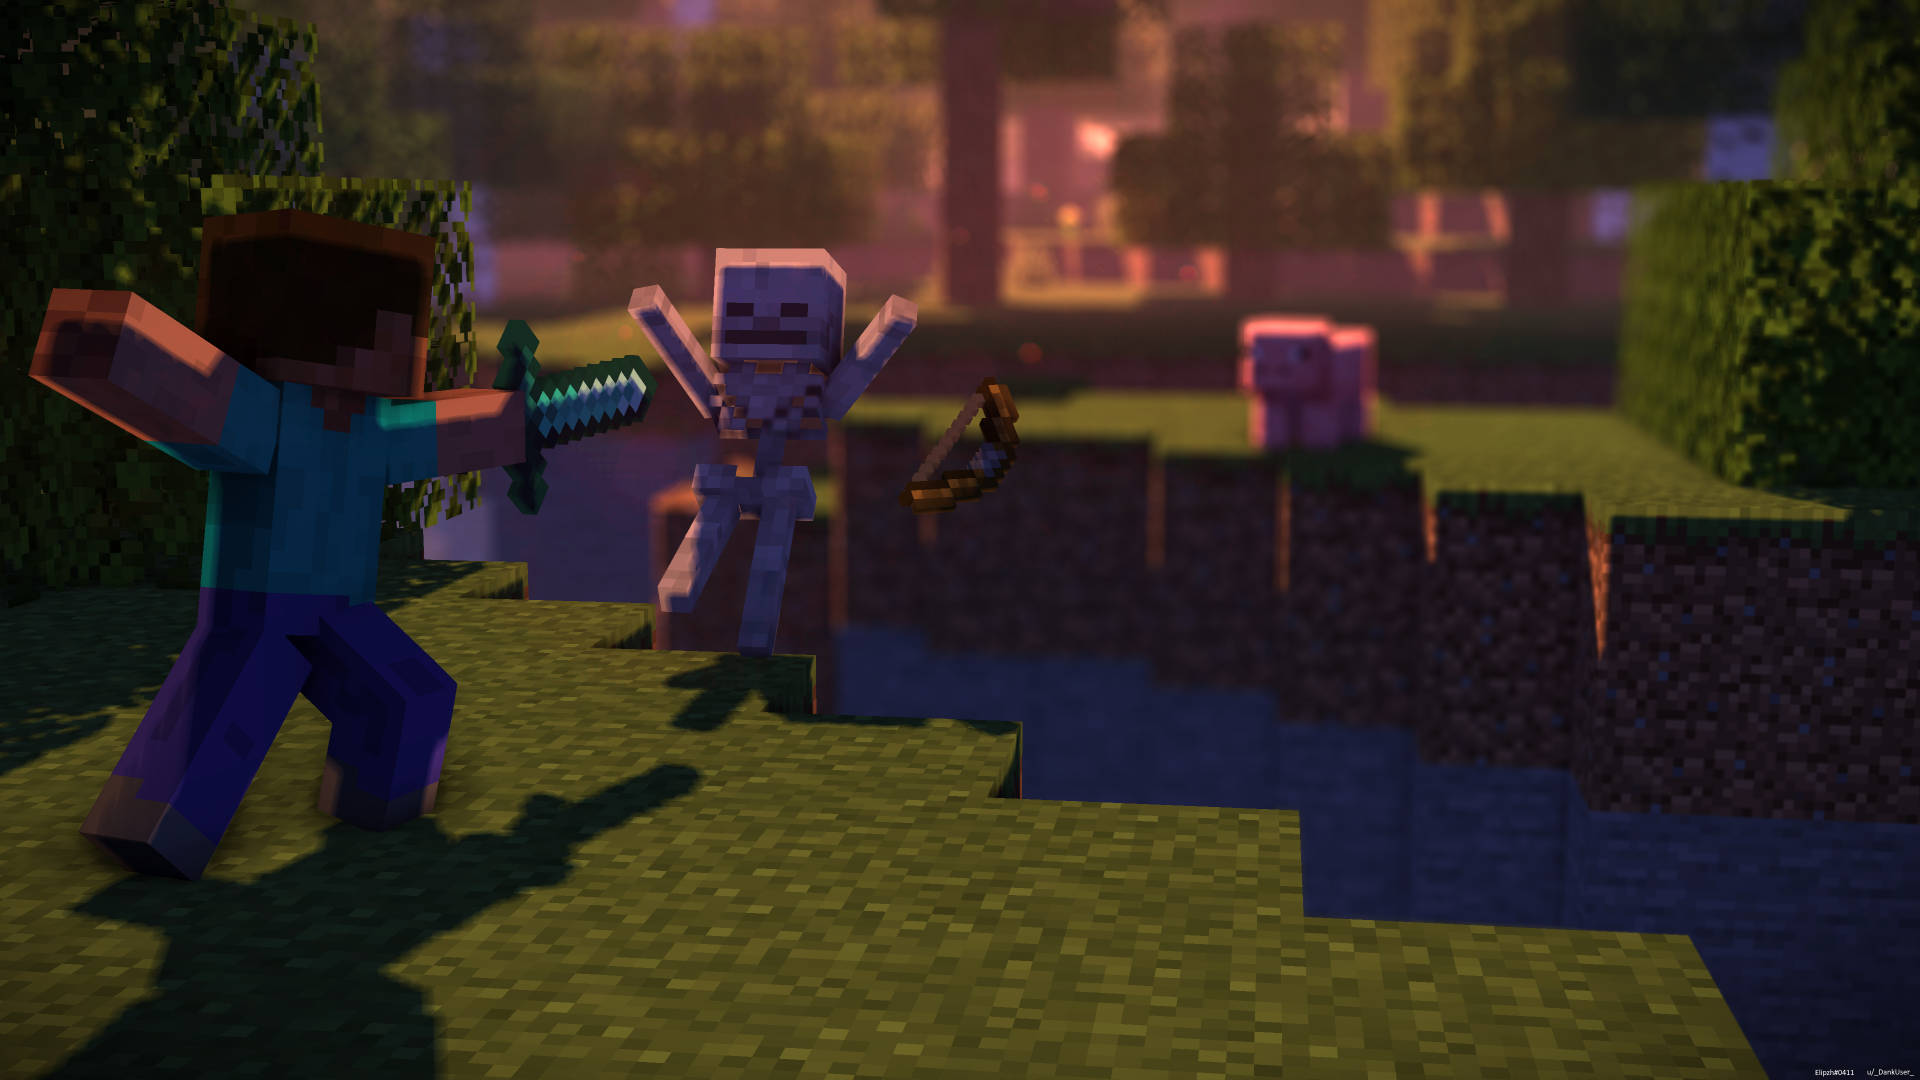 Beautiful Minecraft Fight Picture